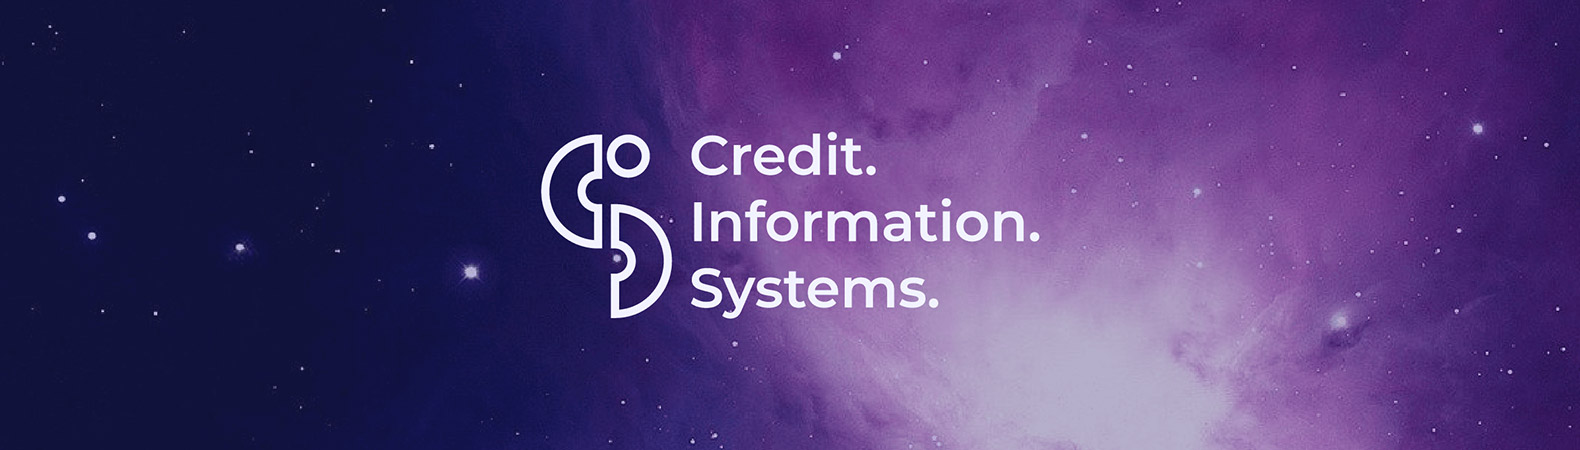 Credit Information Systems